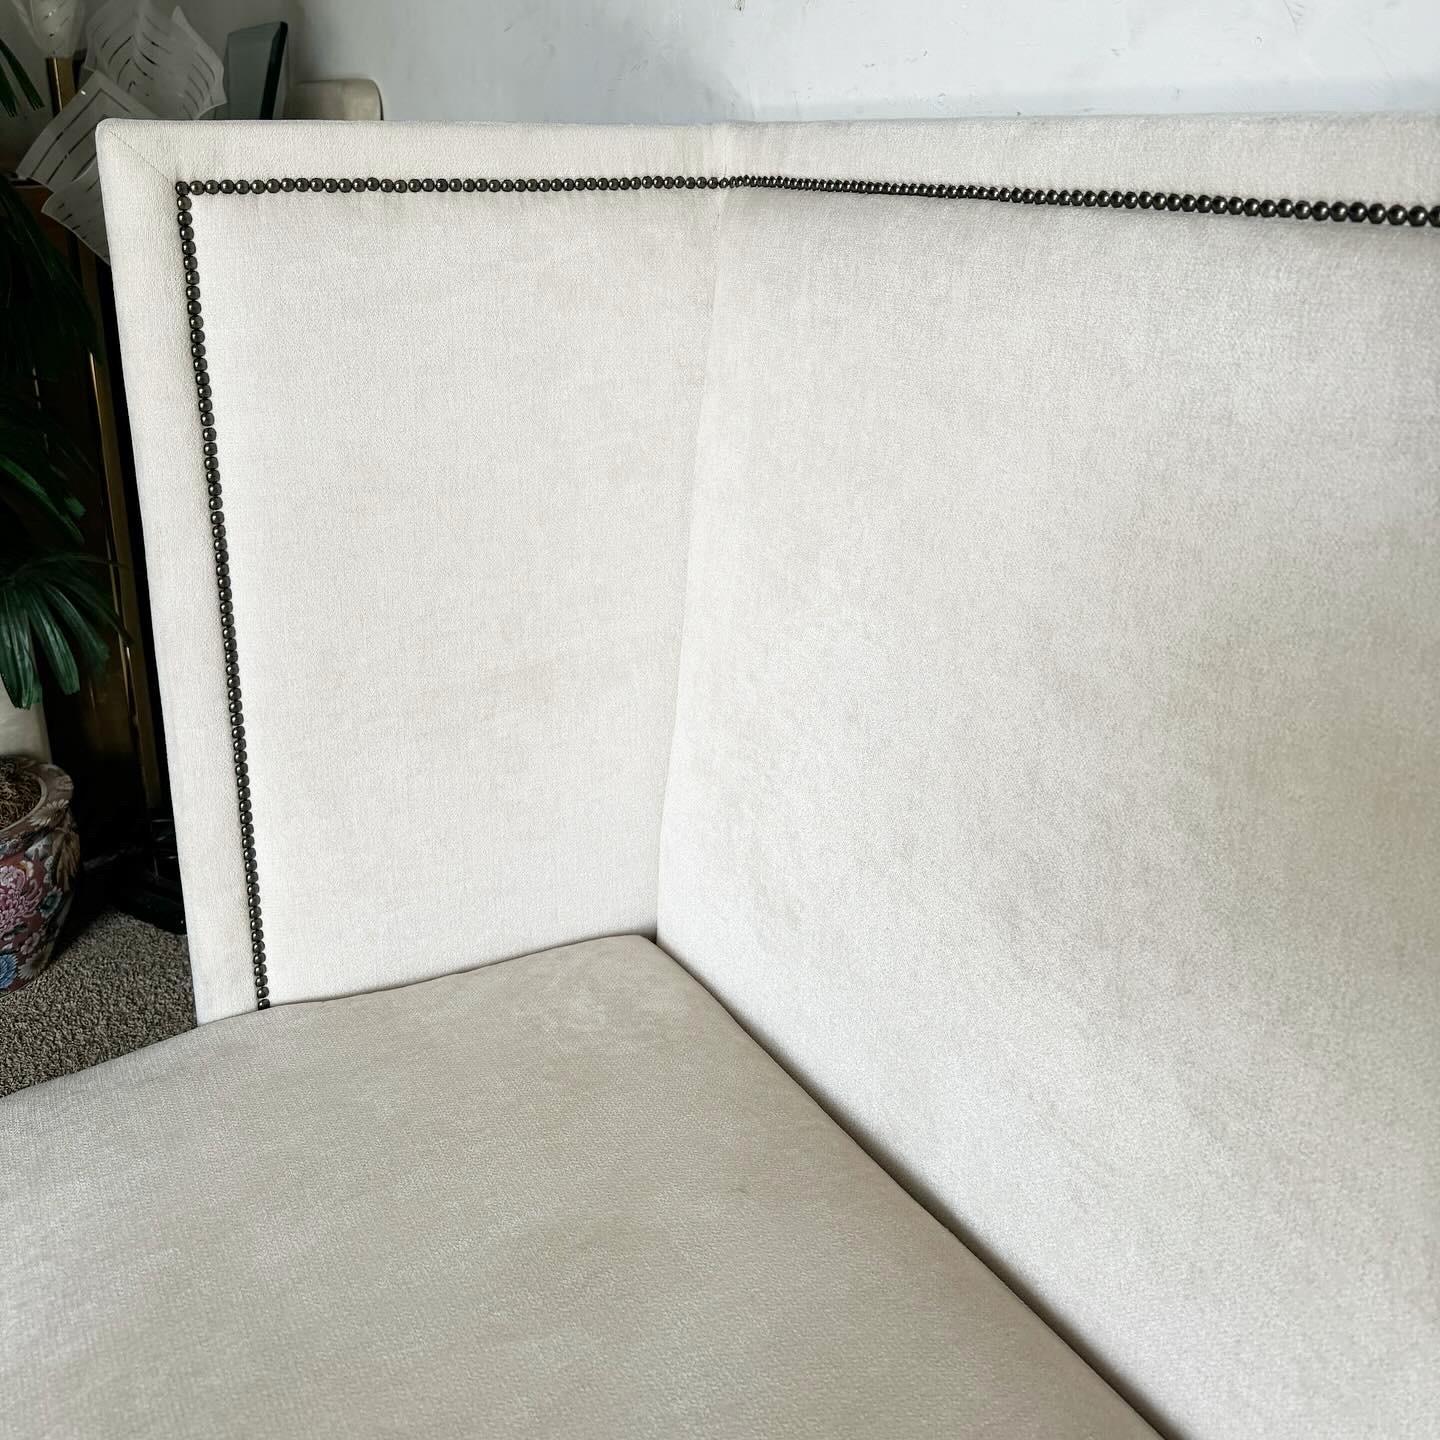 Bernhardt Ivory Fabric With Brushed Metal Nails Marcourt Banquette Sofa In Good Condition For Sale In Delray Beach, FL